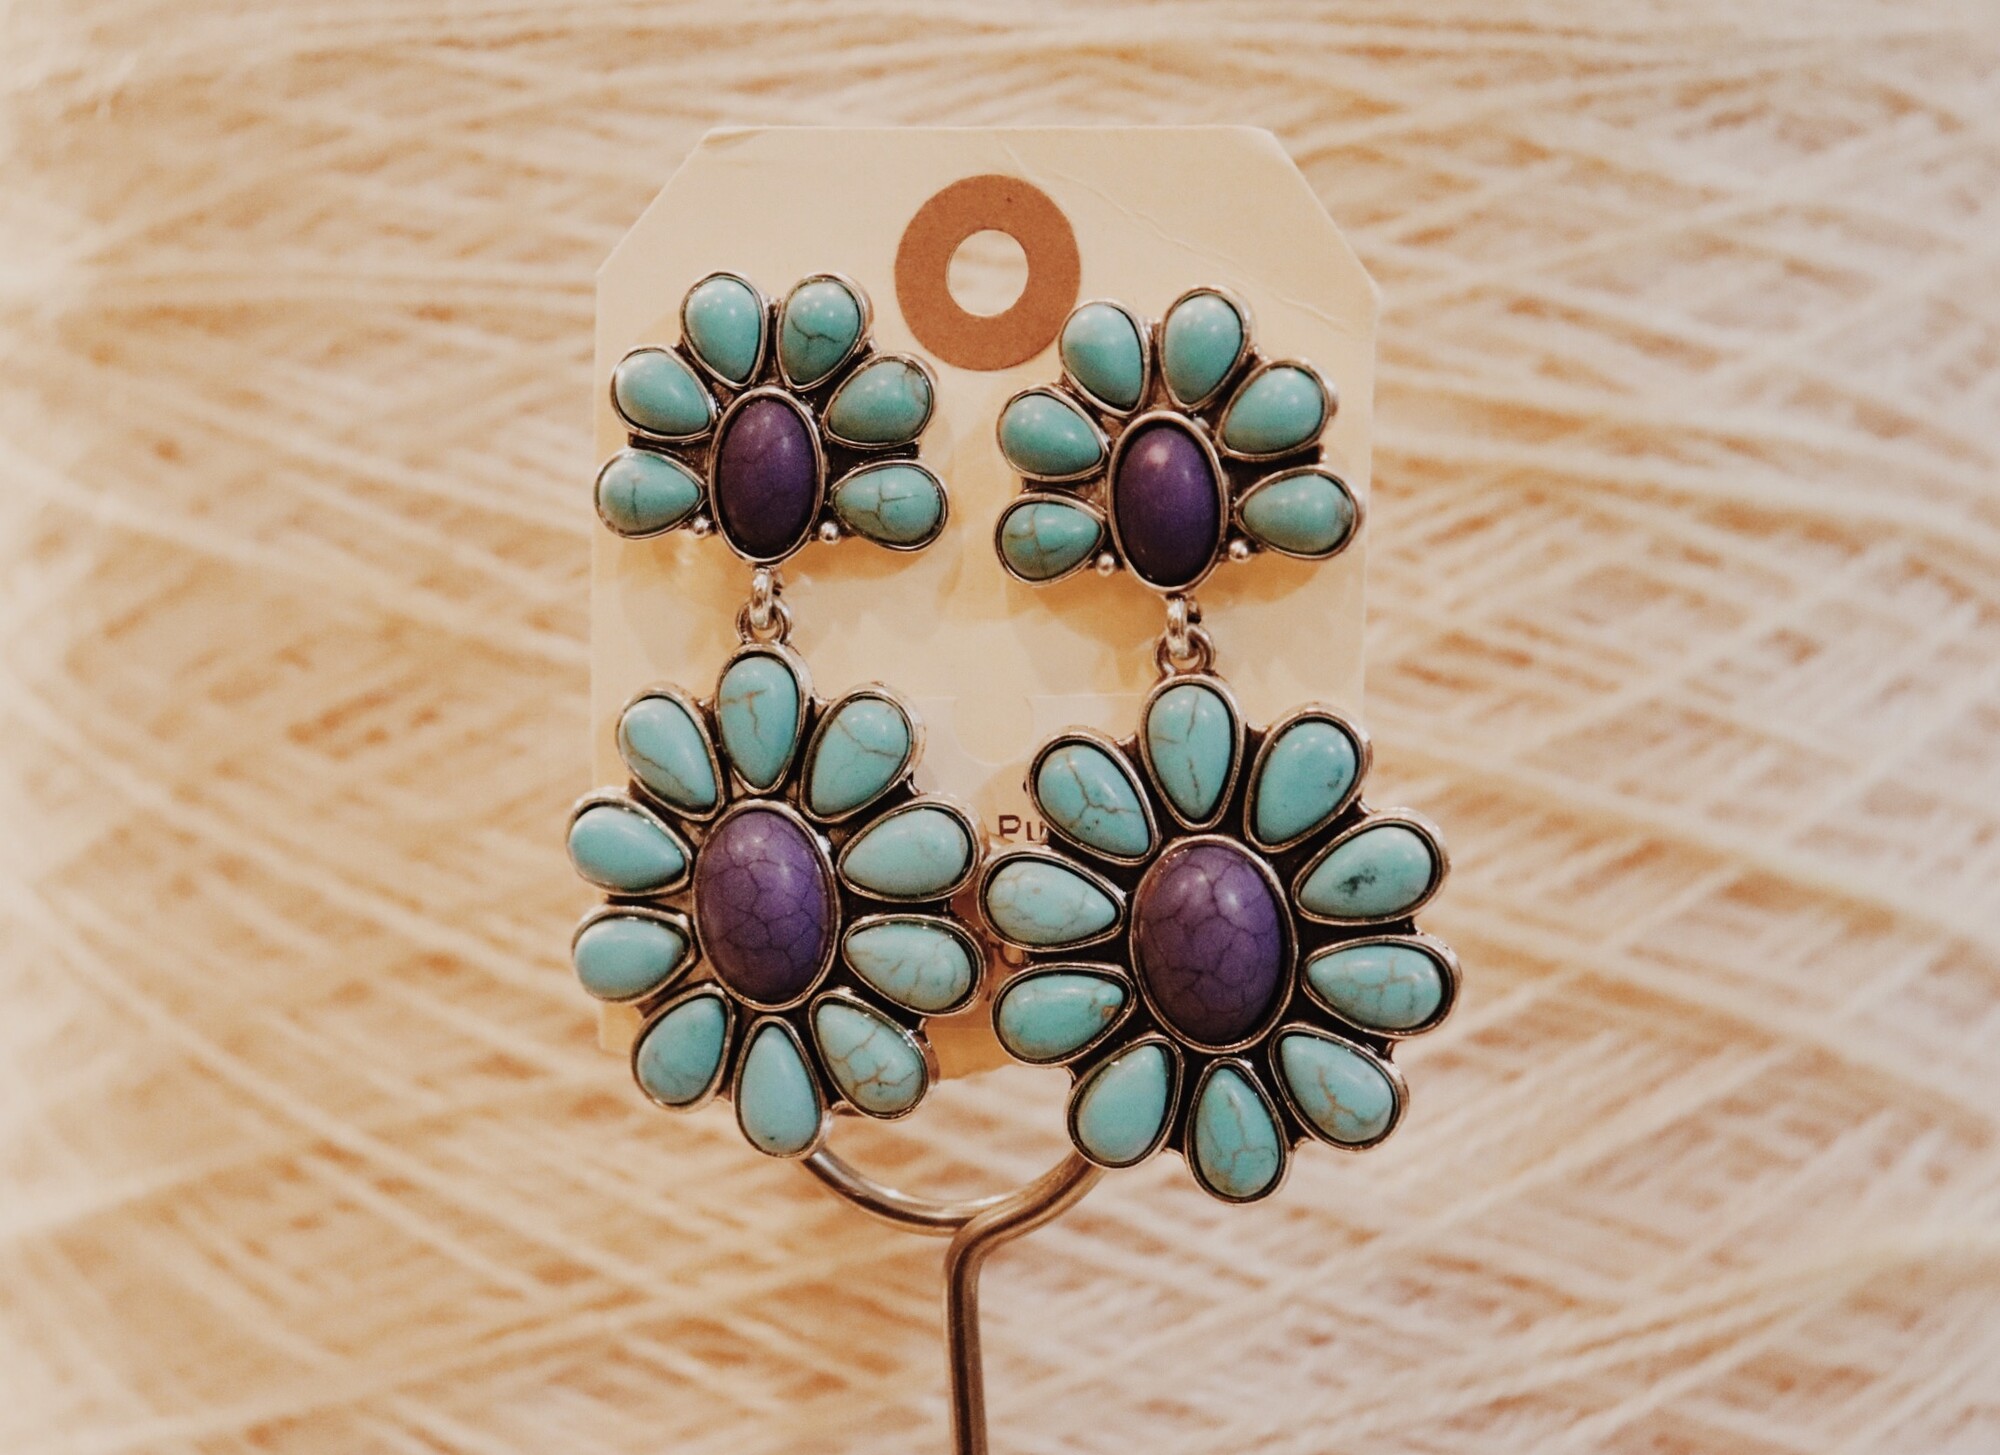 These fun earrings measure 2.5 inches long!